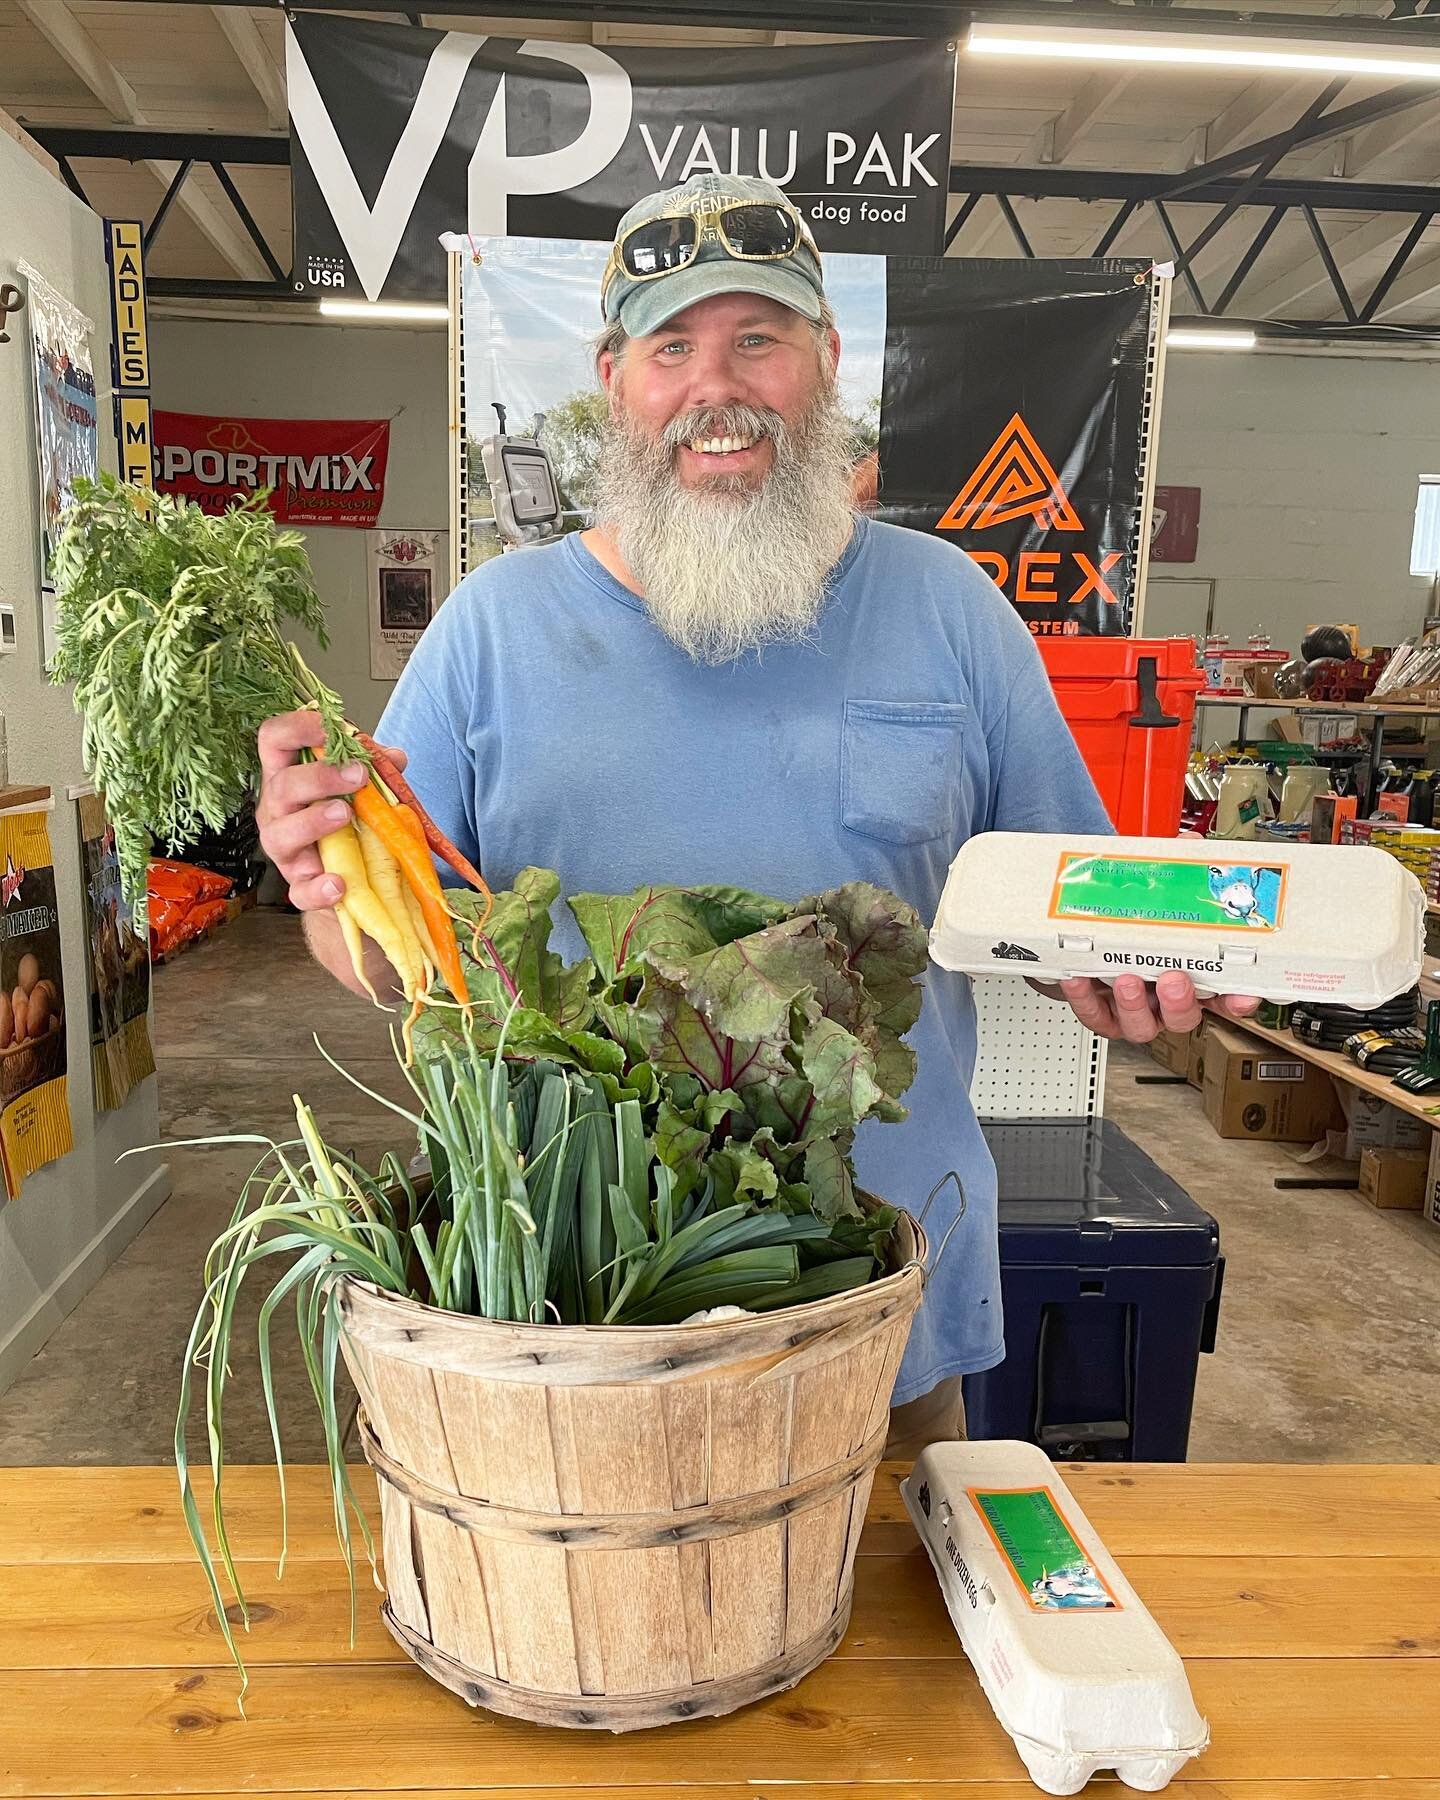 Big congratulations to our fish fry door prize winners, Kevin Pierce and Codi McCorkle!

Codi won our Apex cooler, cap, and t-shirt, and Kevin won a basket of organic vegetables and farm fresh eggs from our neighbors at the Burro Malo Farm!